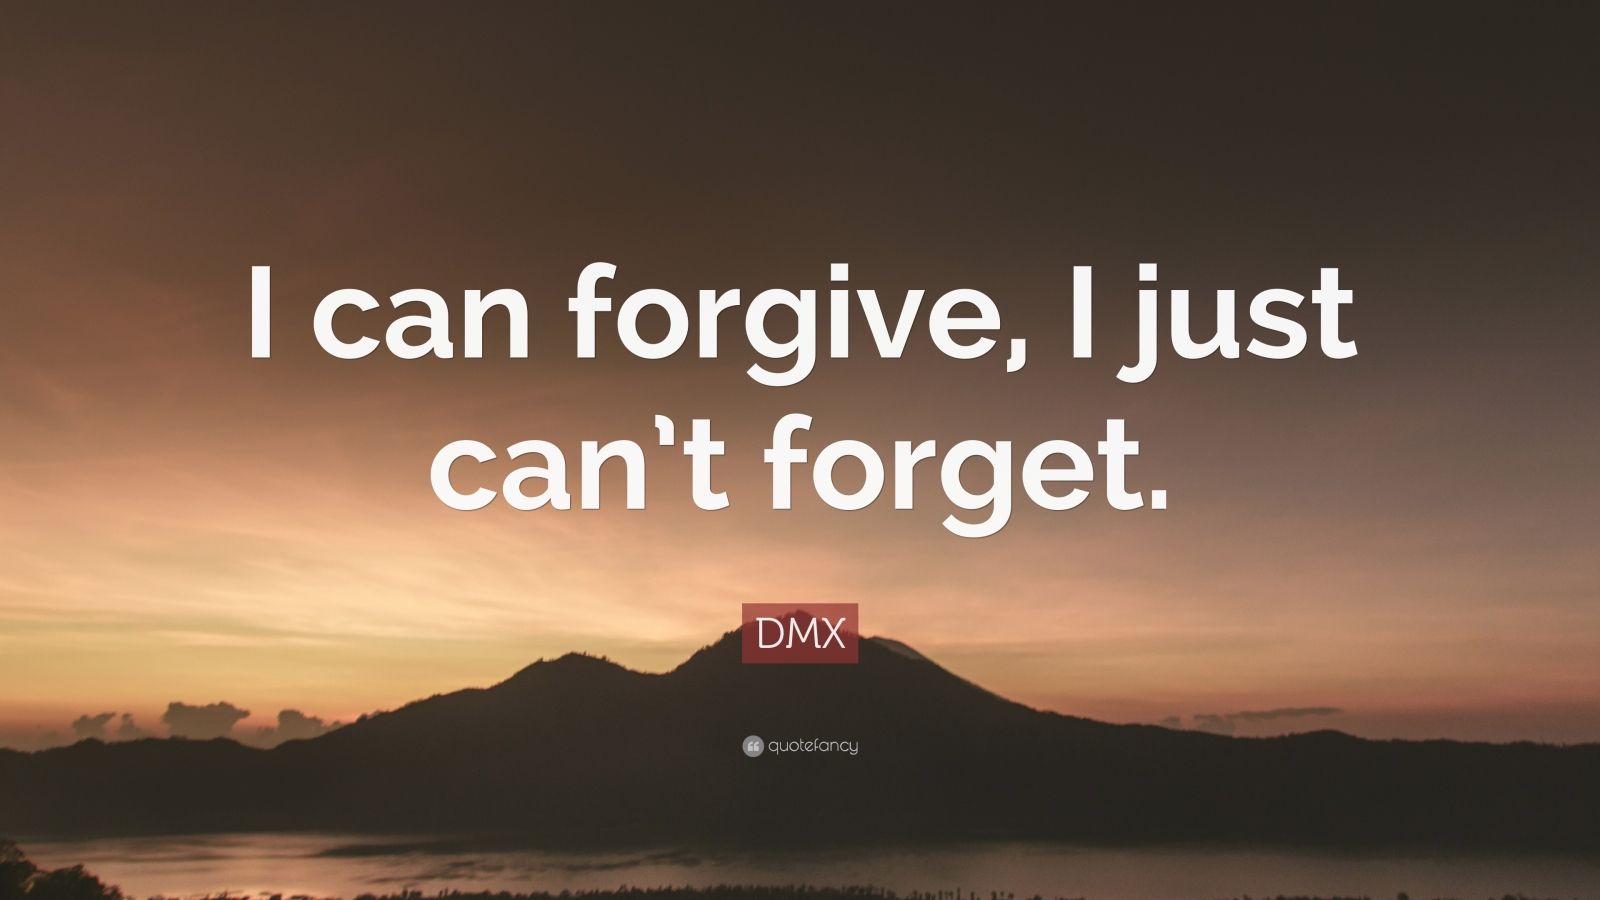 DMX Quote: “I can forgive, I just can’t forget.” (9 wallpapers